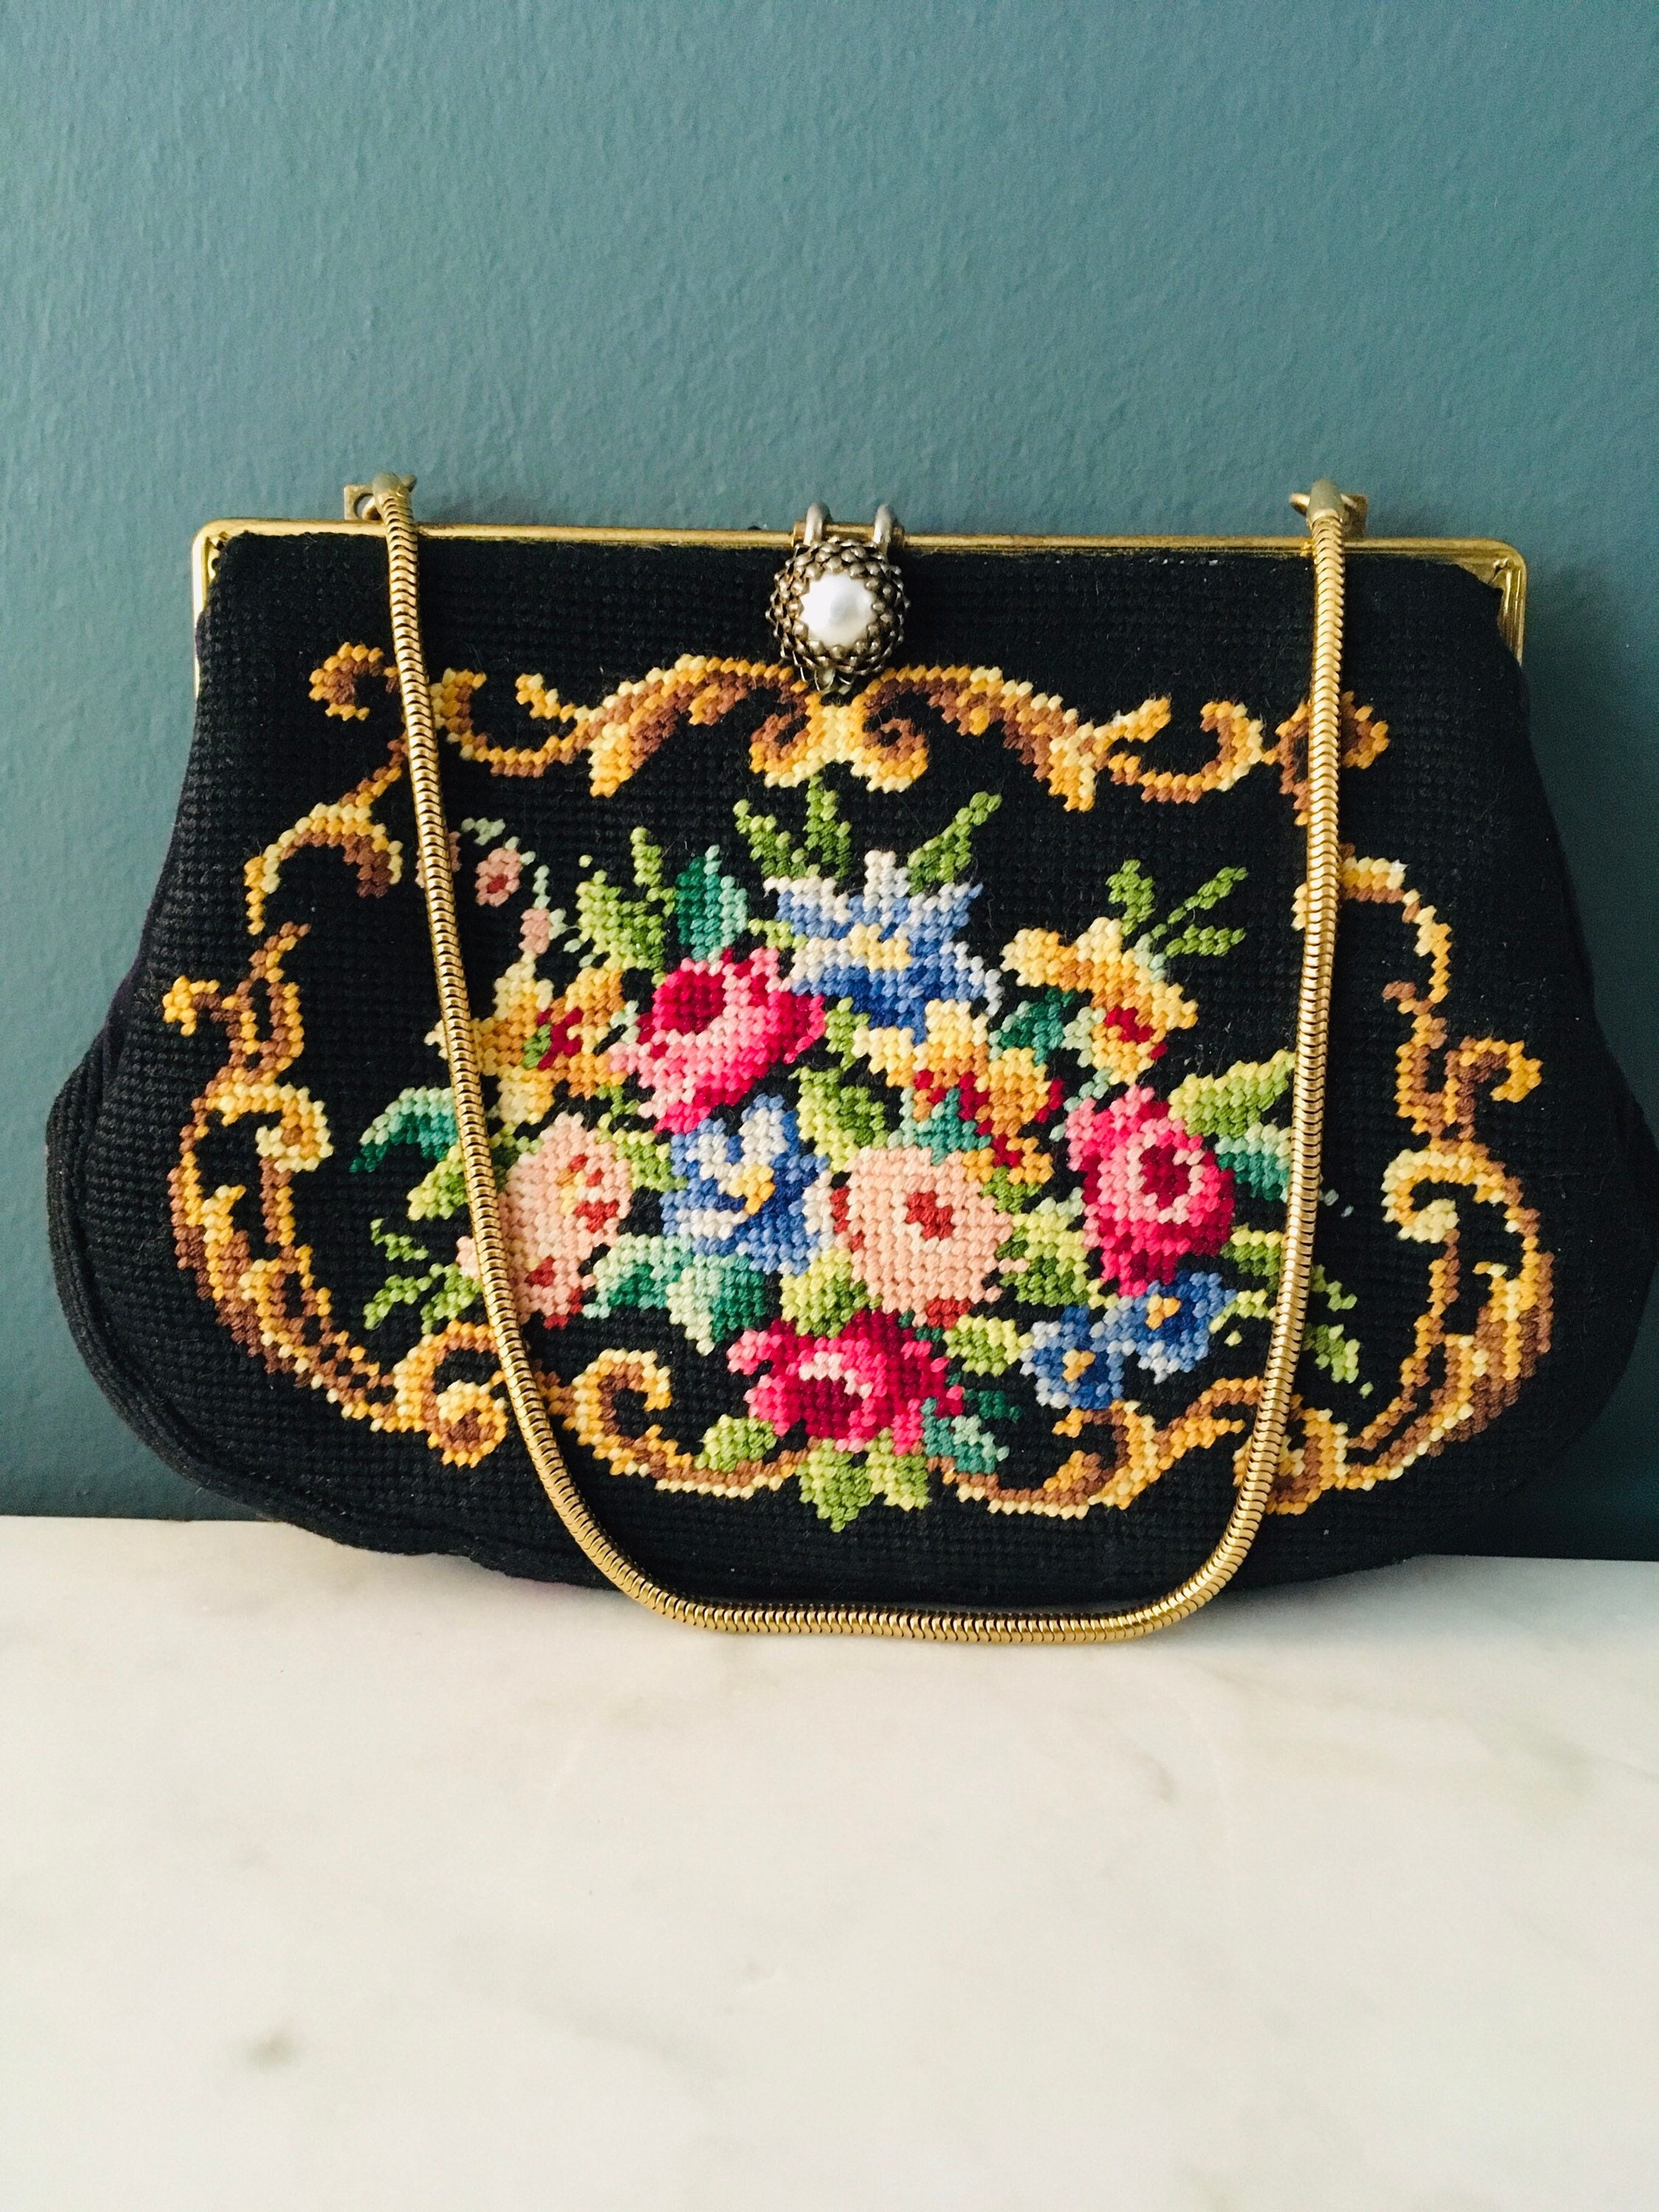 Tapestry Purse/ Handbag. Vintage Floral Needlepoint Bag. Gold chain and  Pearl Clasp.